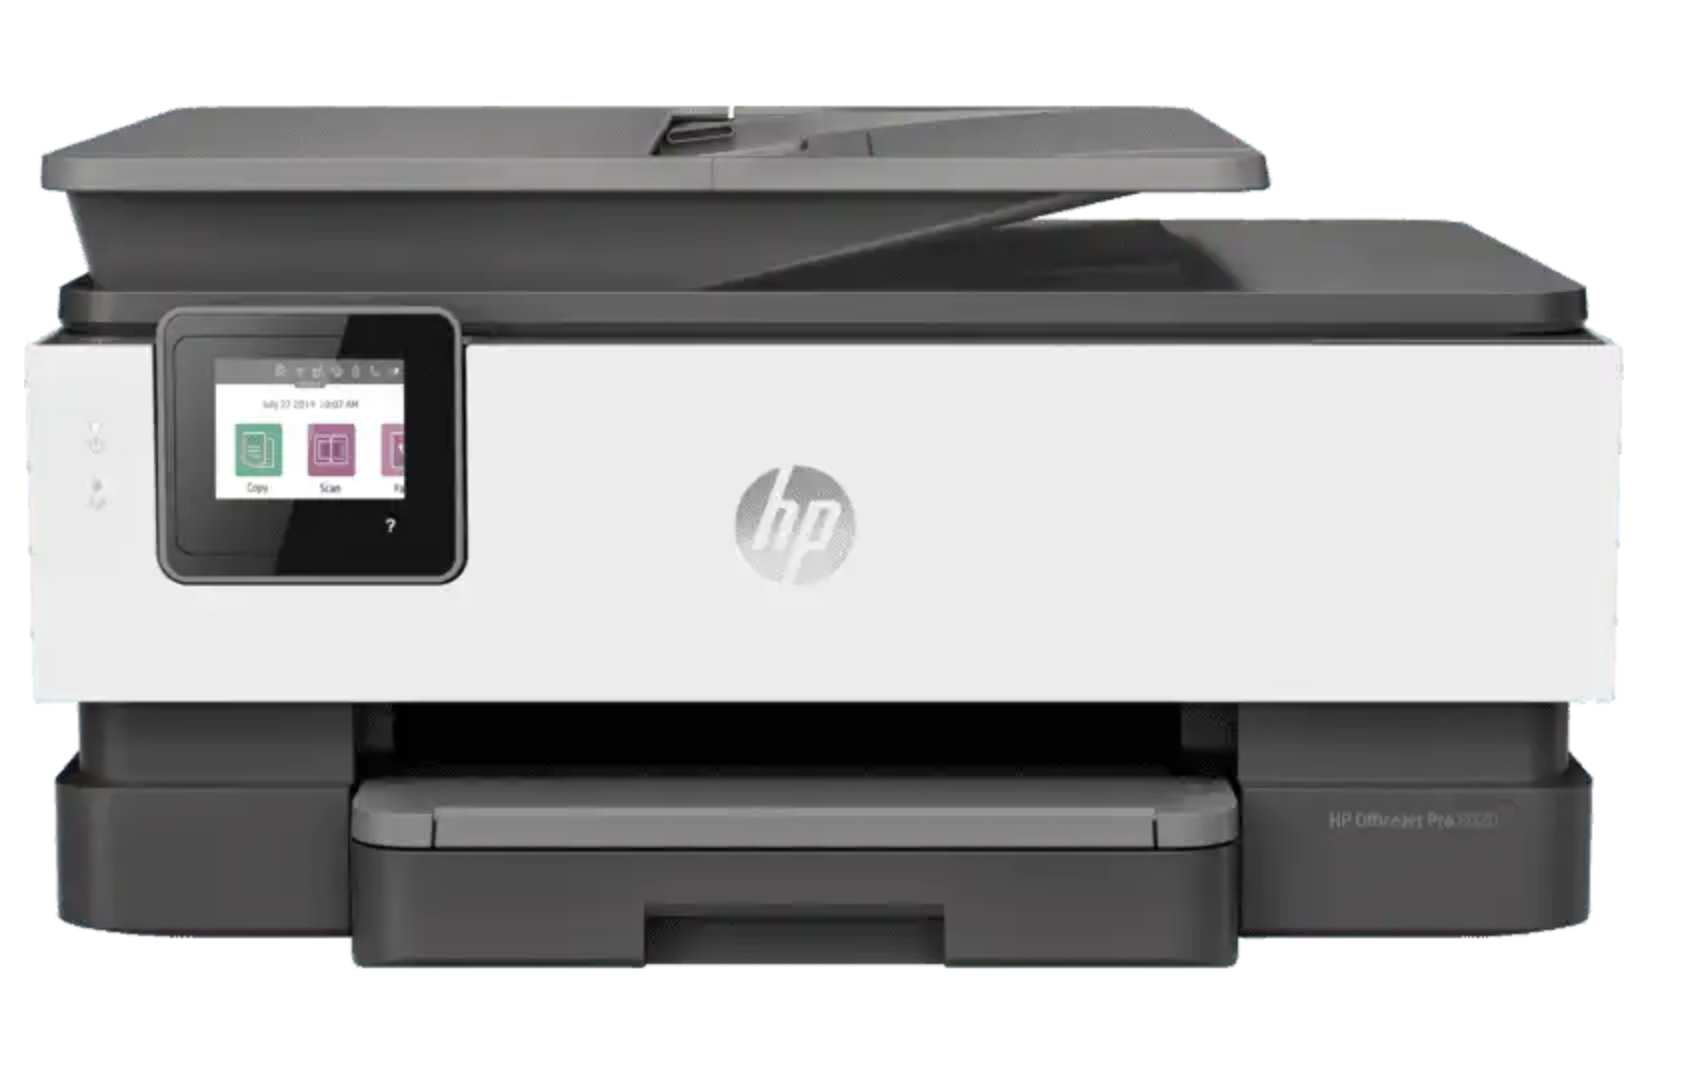 HP OfficeJet Pro 8020 All-in-One Printer + a pack of A4 paper - TEK-Shanghai